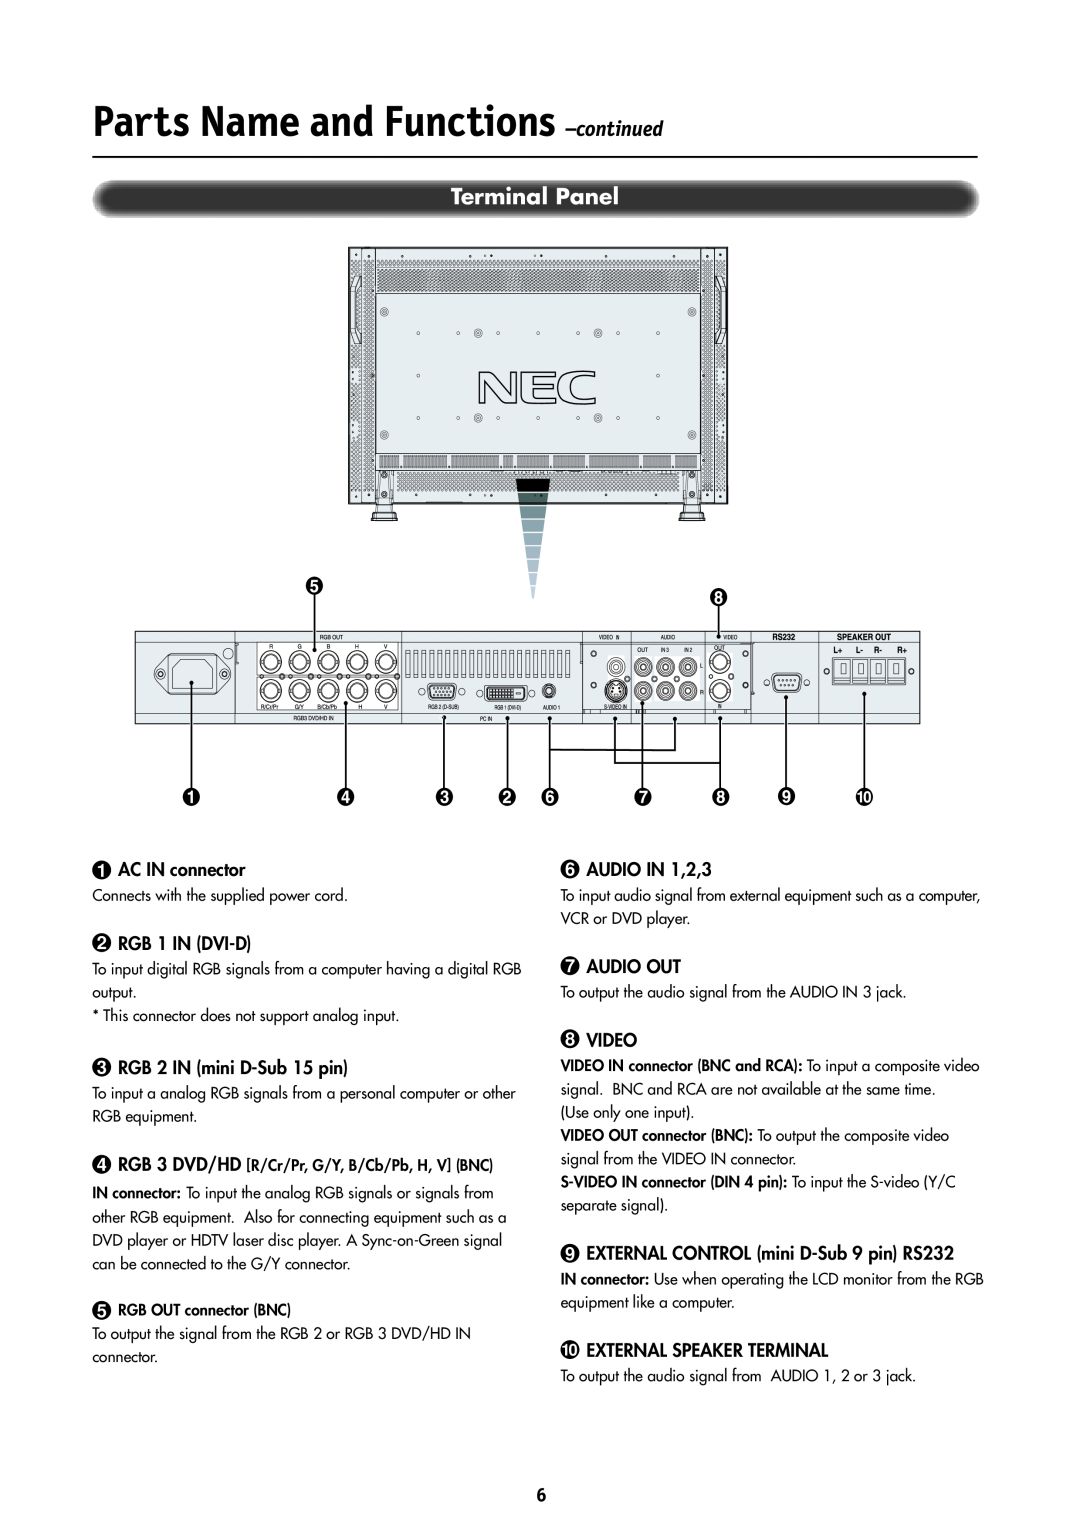 NEC LCD4000 manual Parts Name and Functions -continued, Terminal Panel 